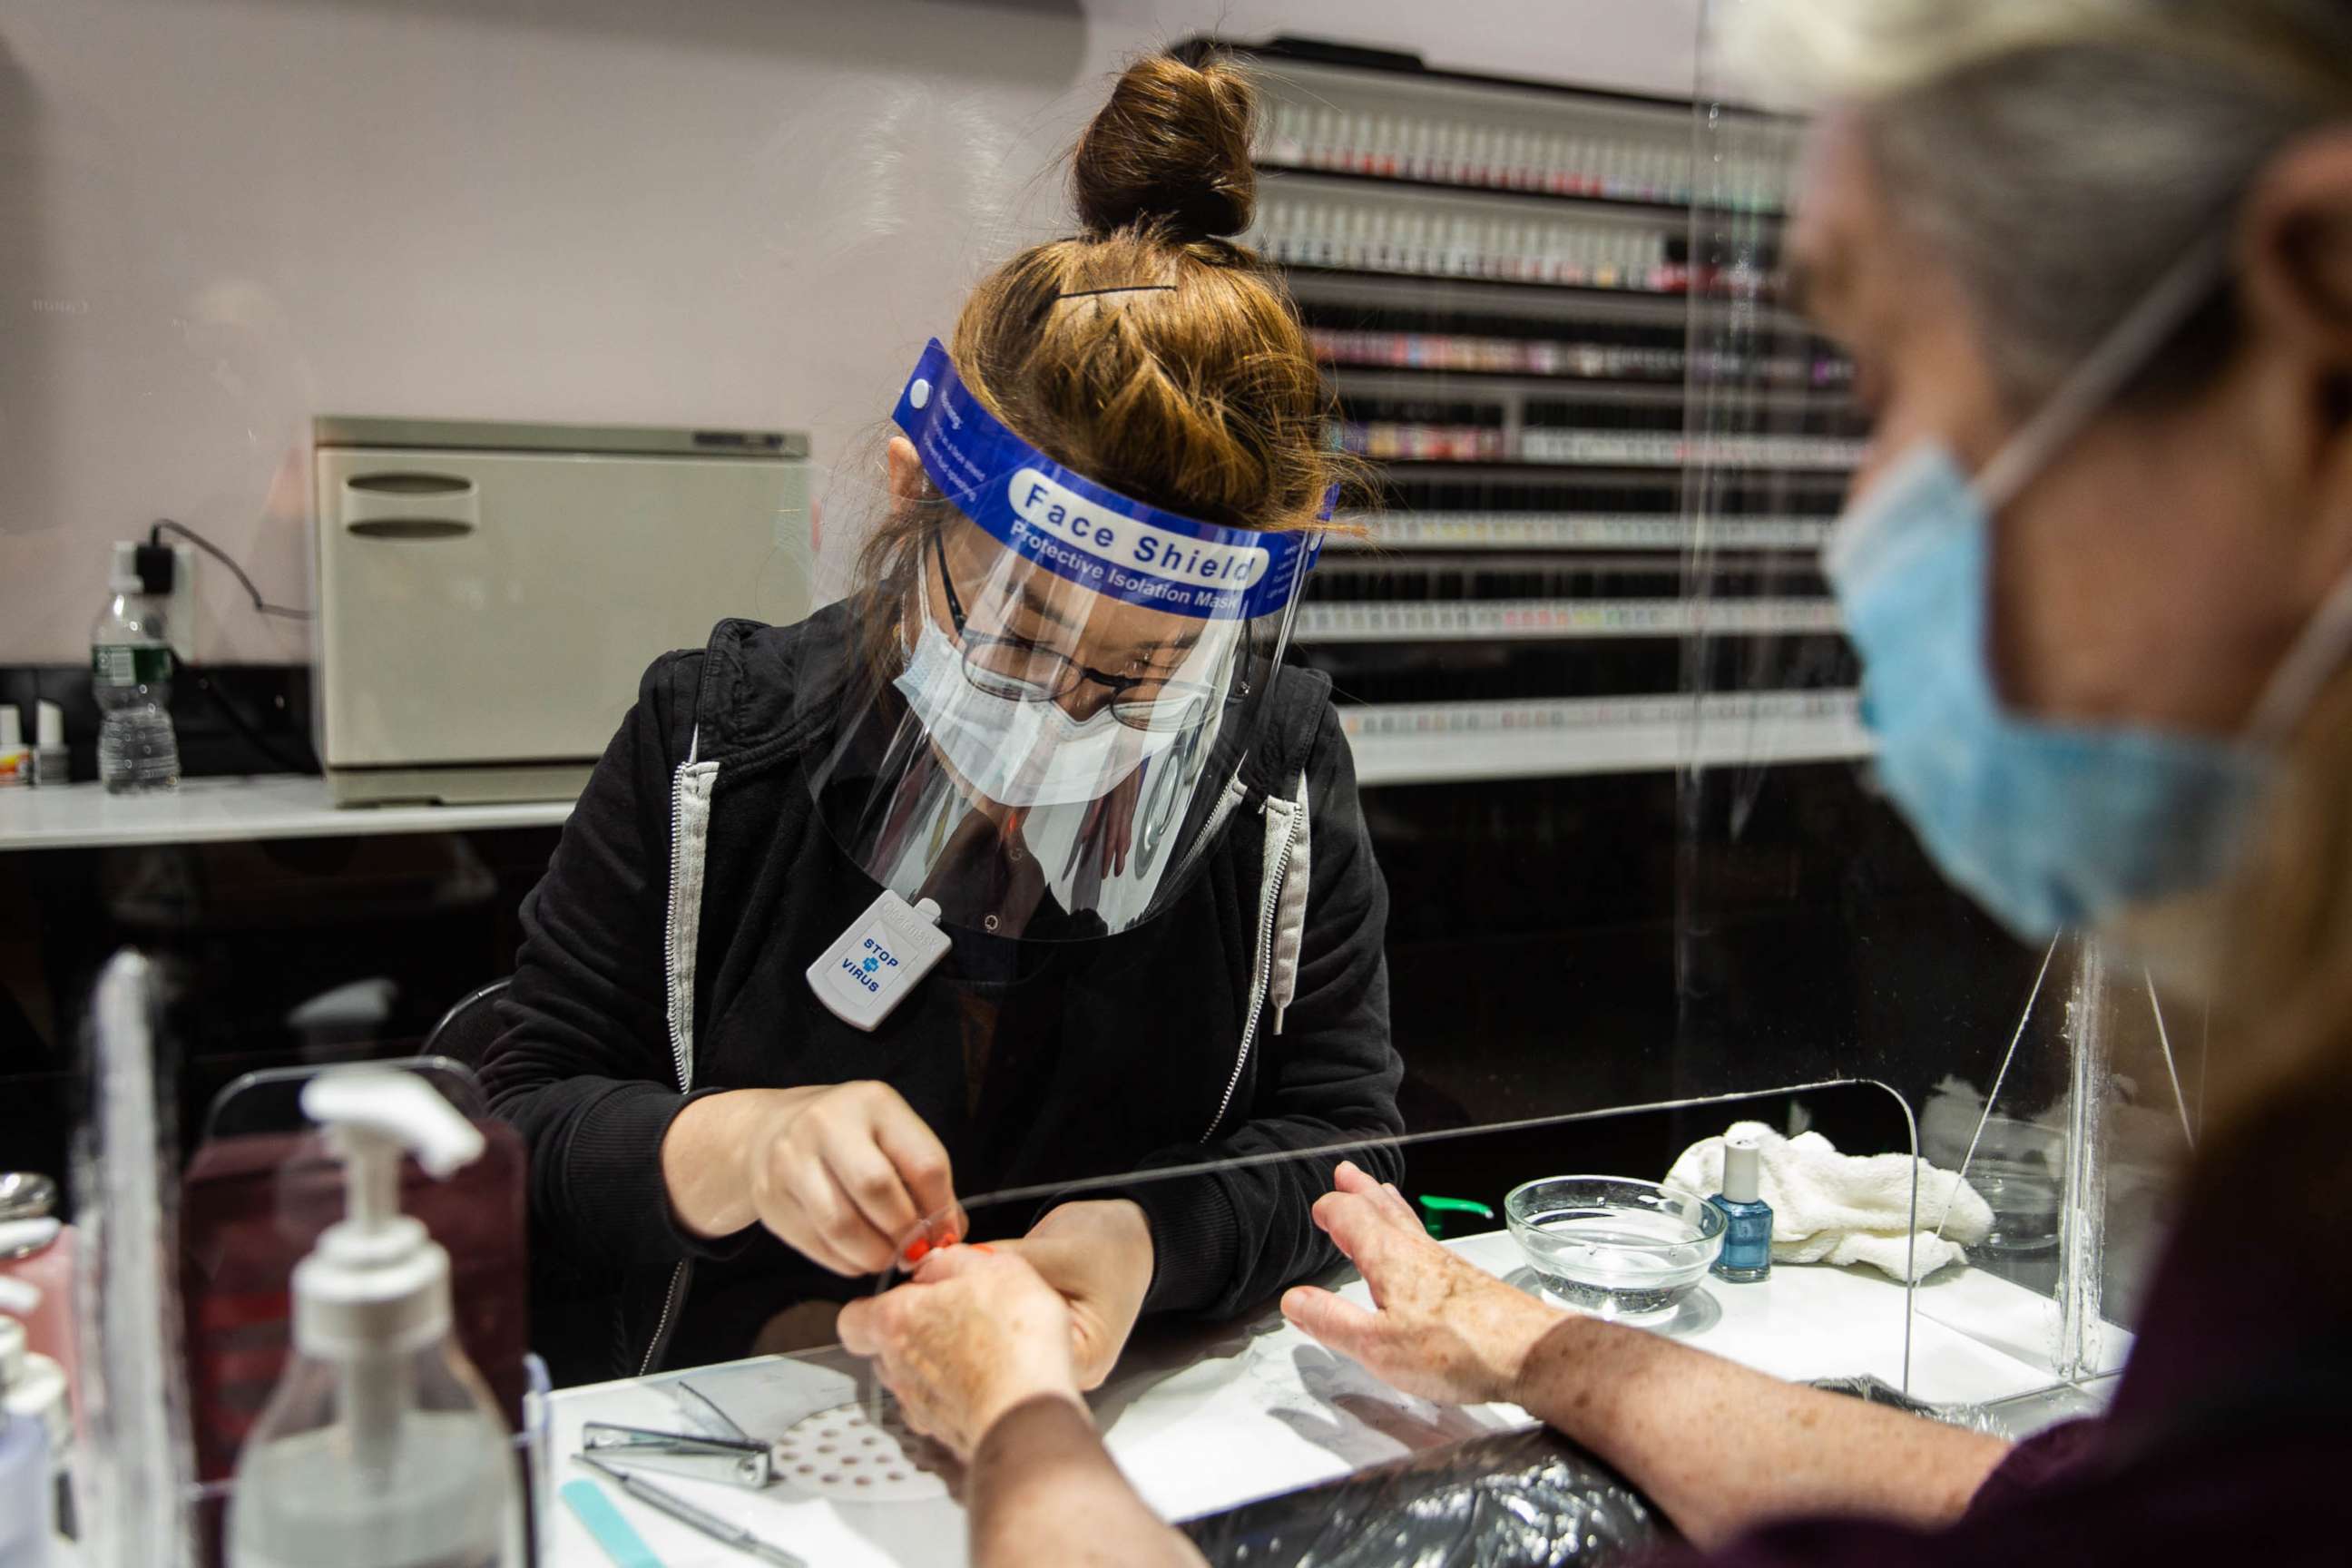 PHOTO: A worker wearing a protective mask and face shield gives a customer a manicure behind a plastic barrier at a nail salon in Syracuse, New York, June 15, 2020.